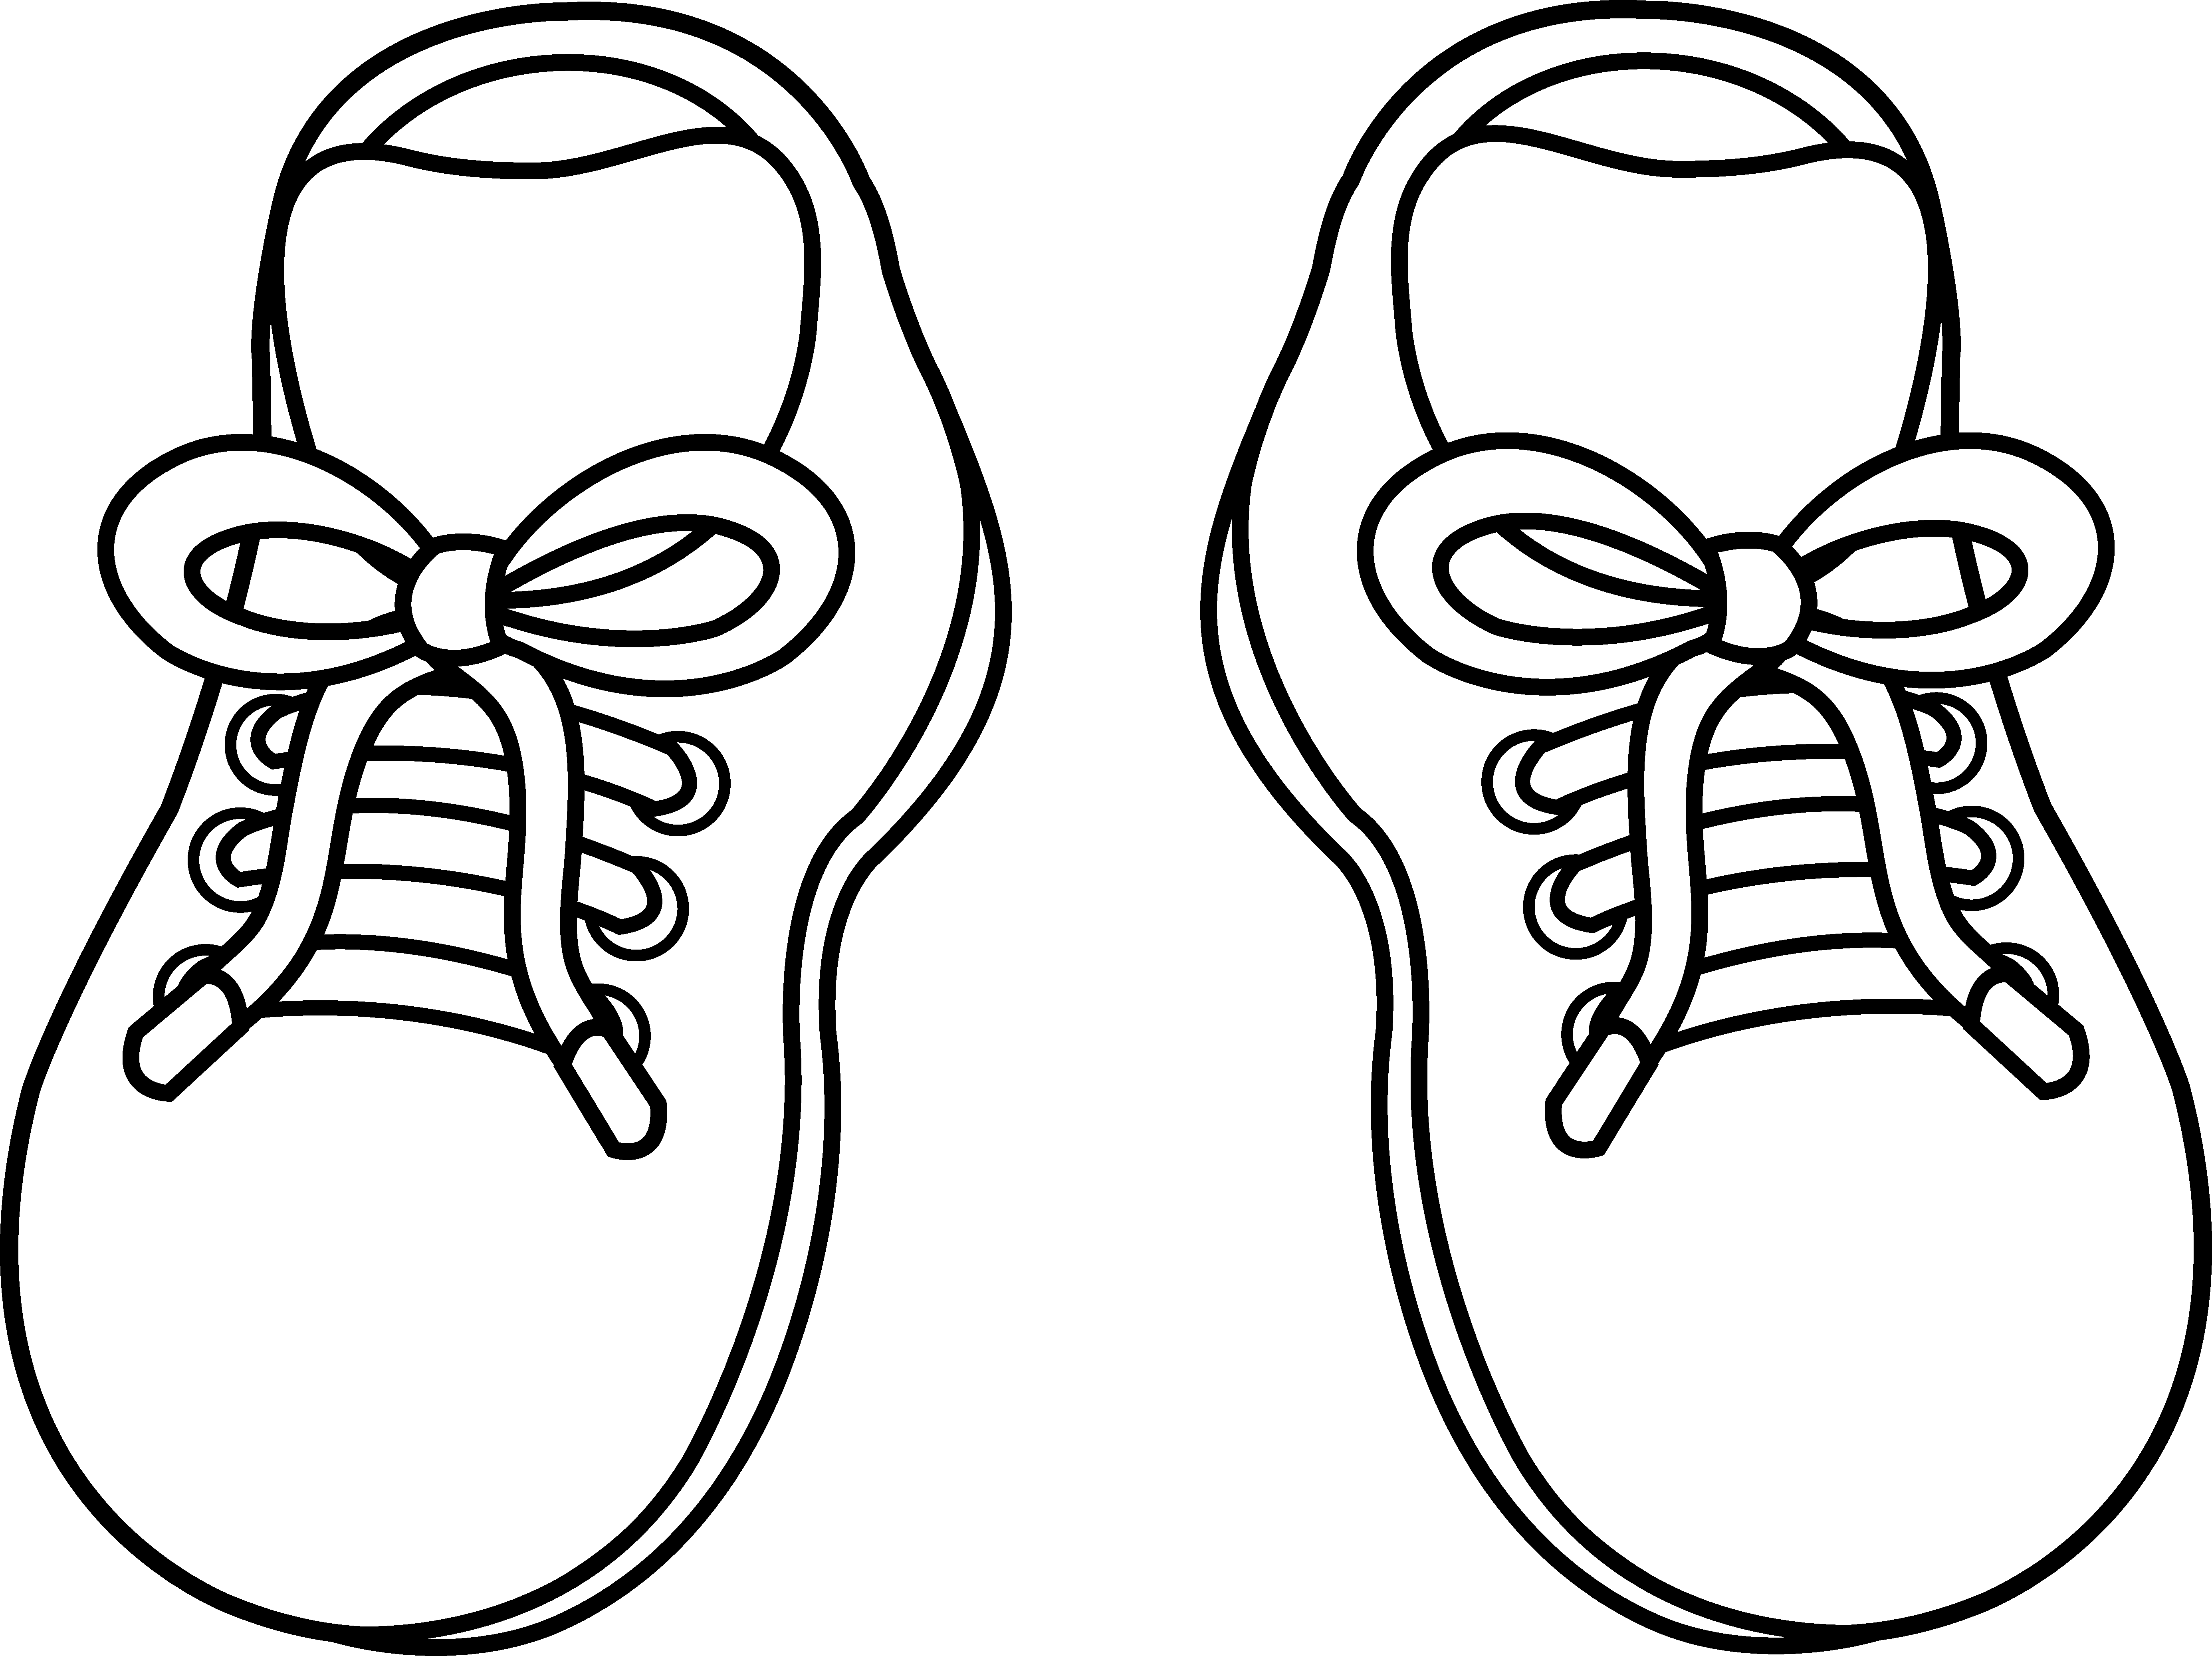 Nike Running Shoes Clipart Cl